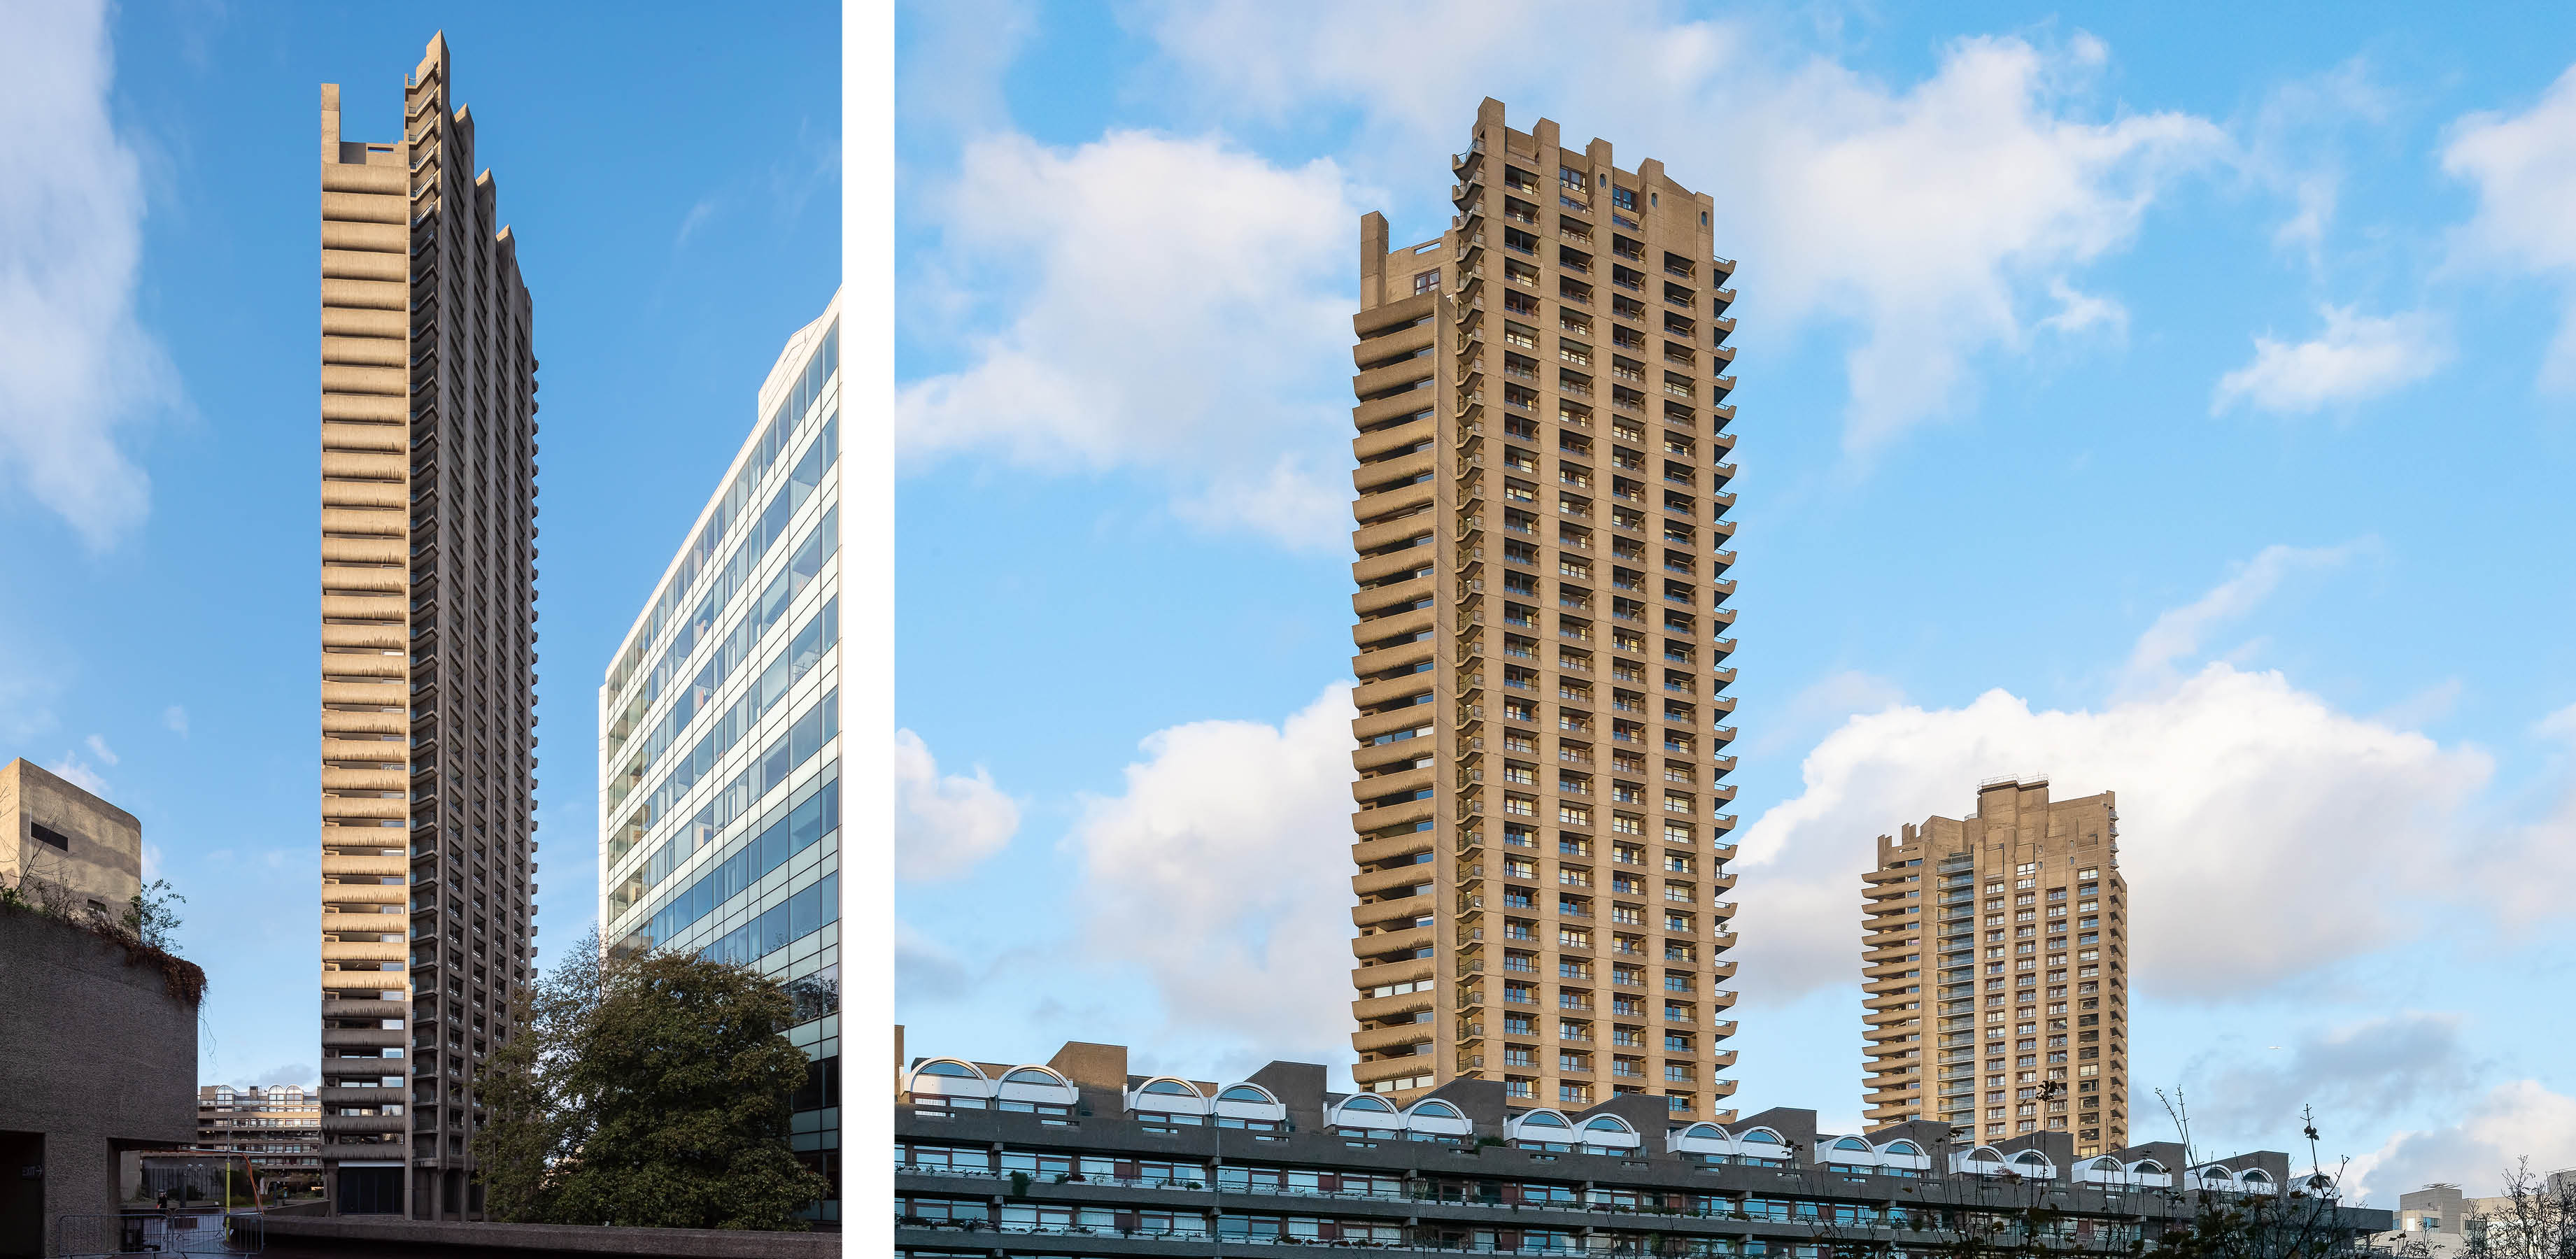 Barbican towers